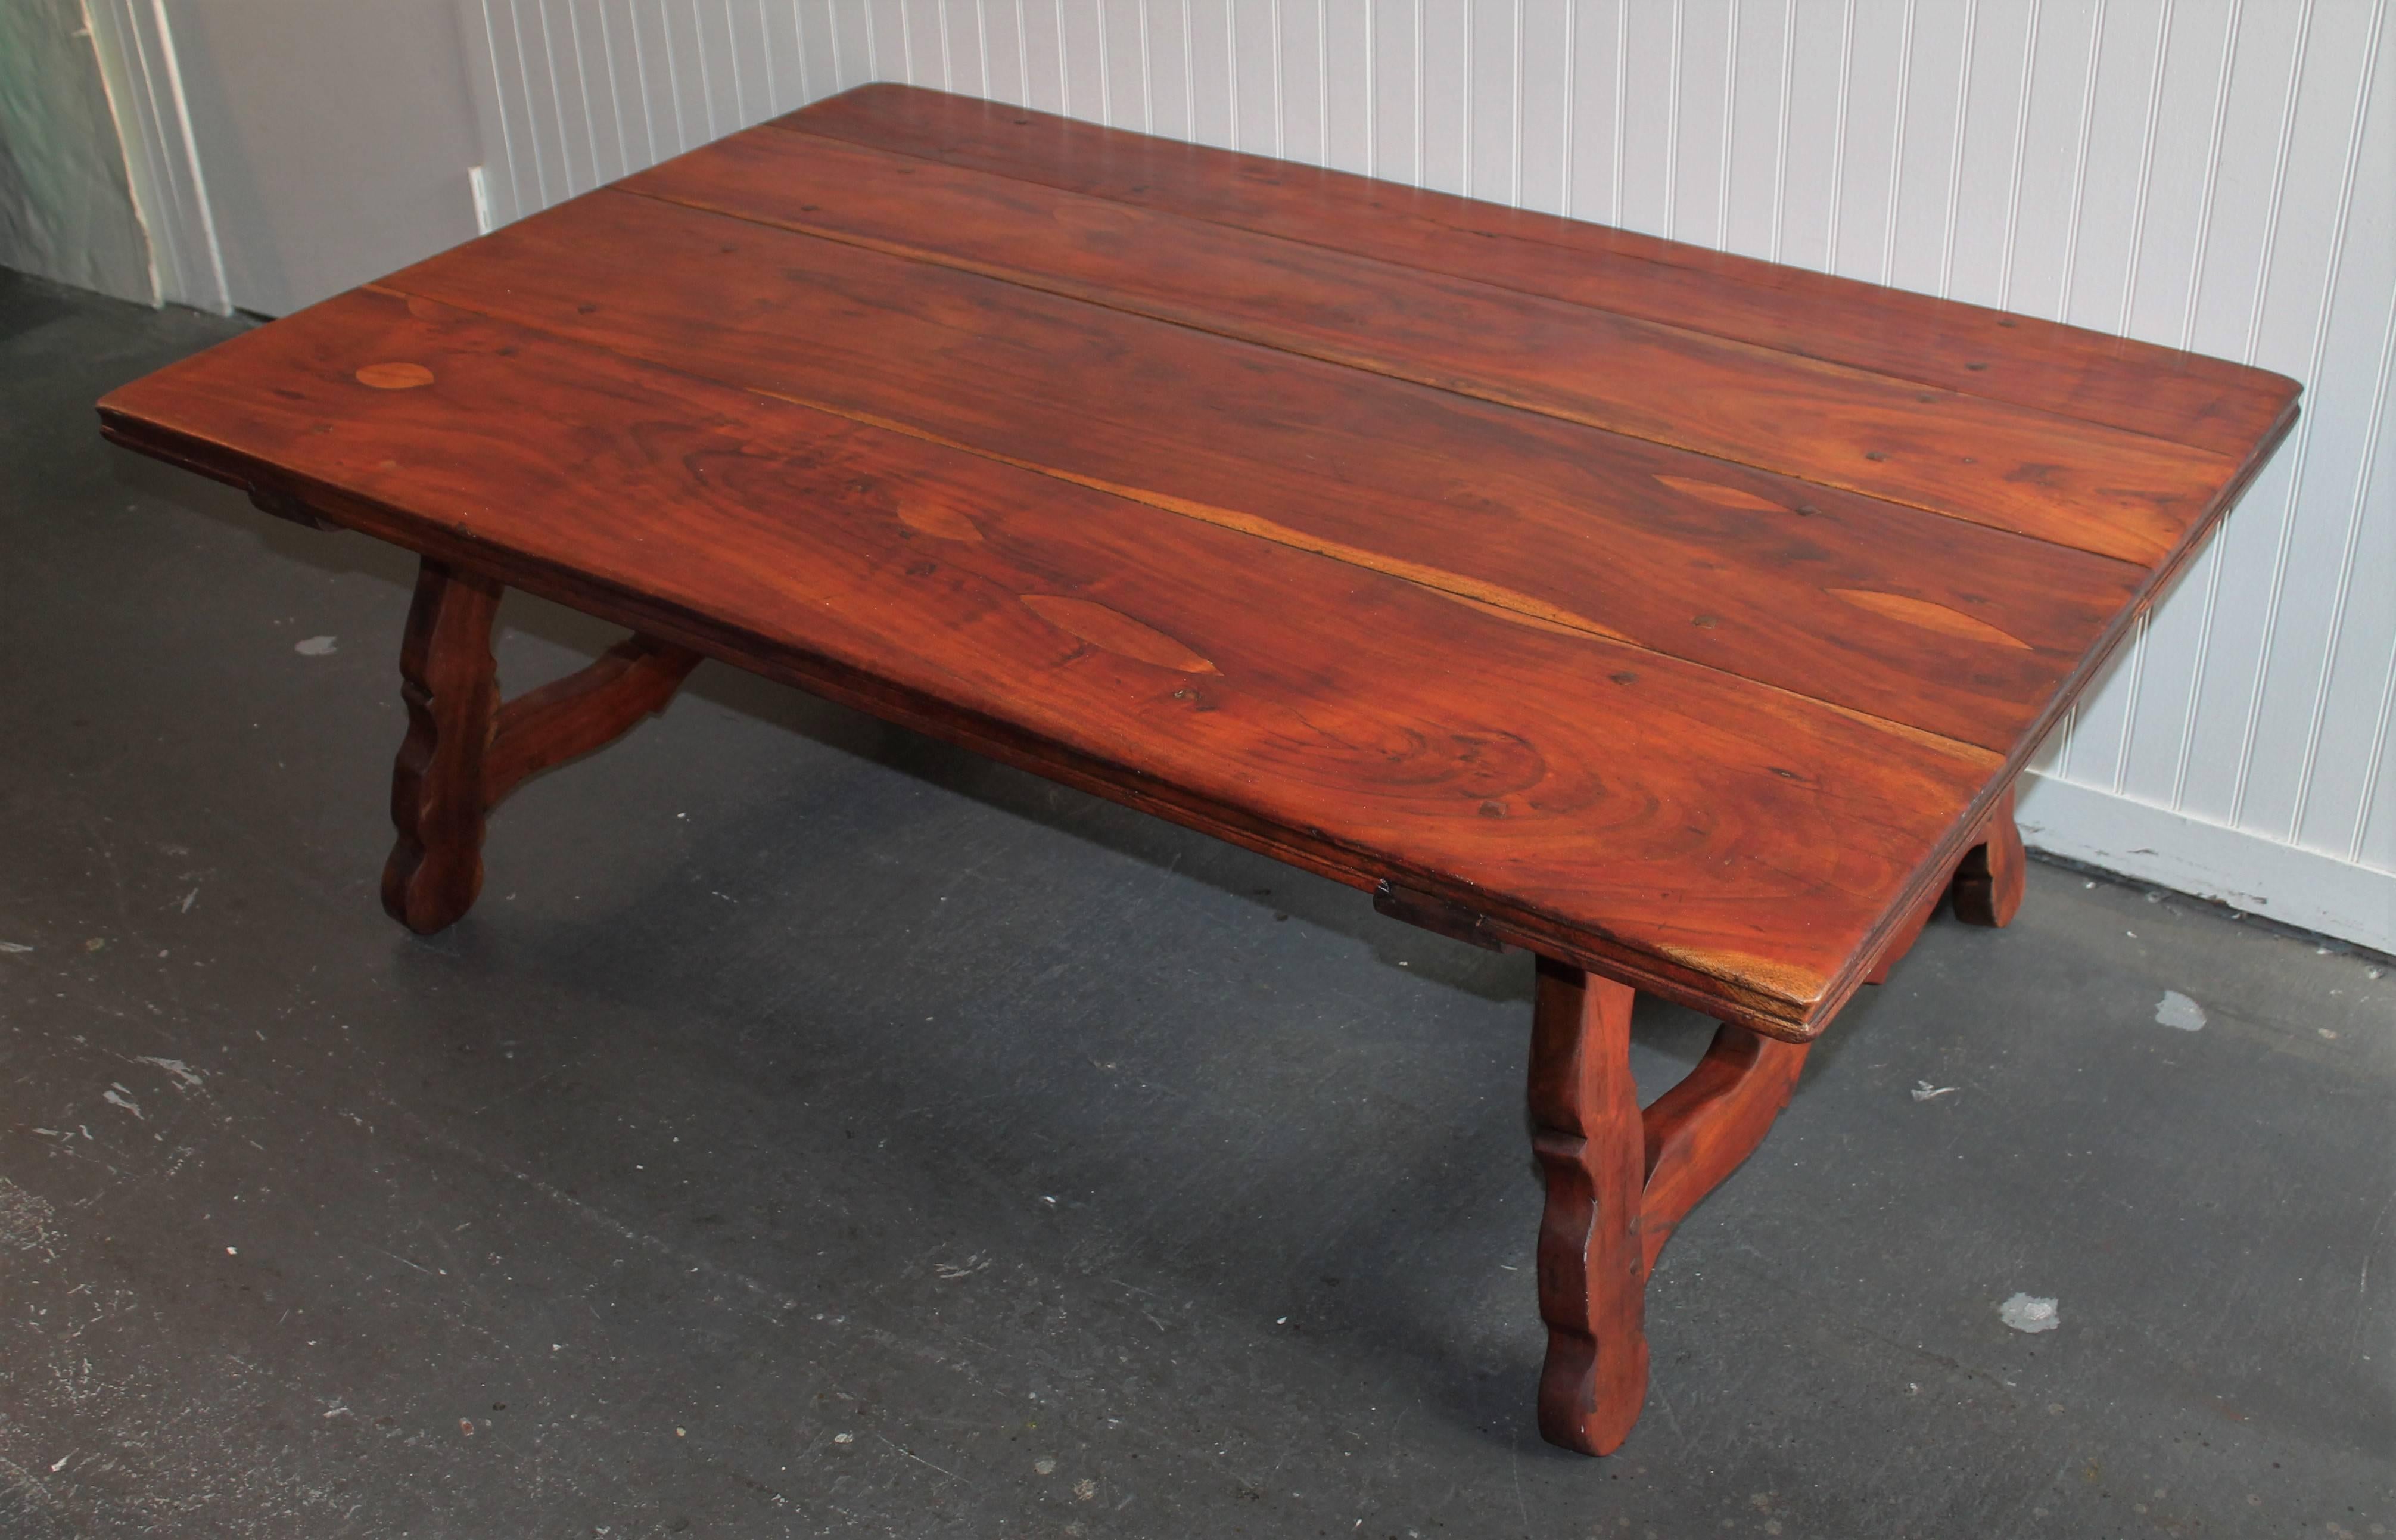 The heavy walnut Spanish style coffee table is in great condition. The construction is dovetailed base and early wood pegs. The form is the best.